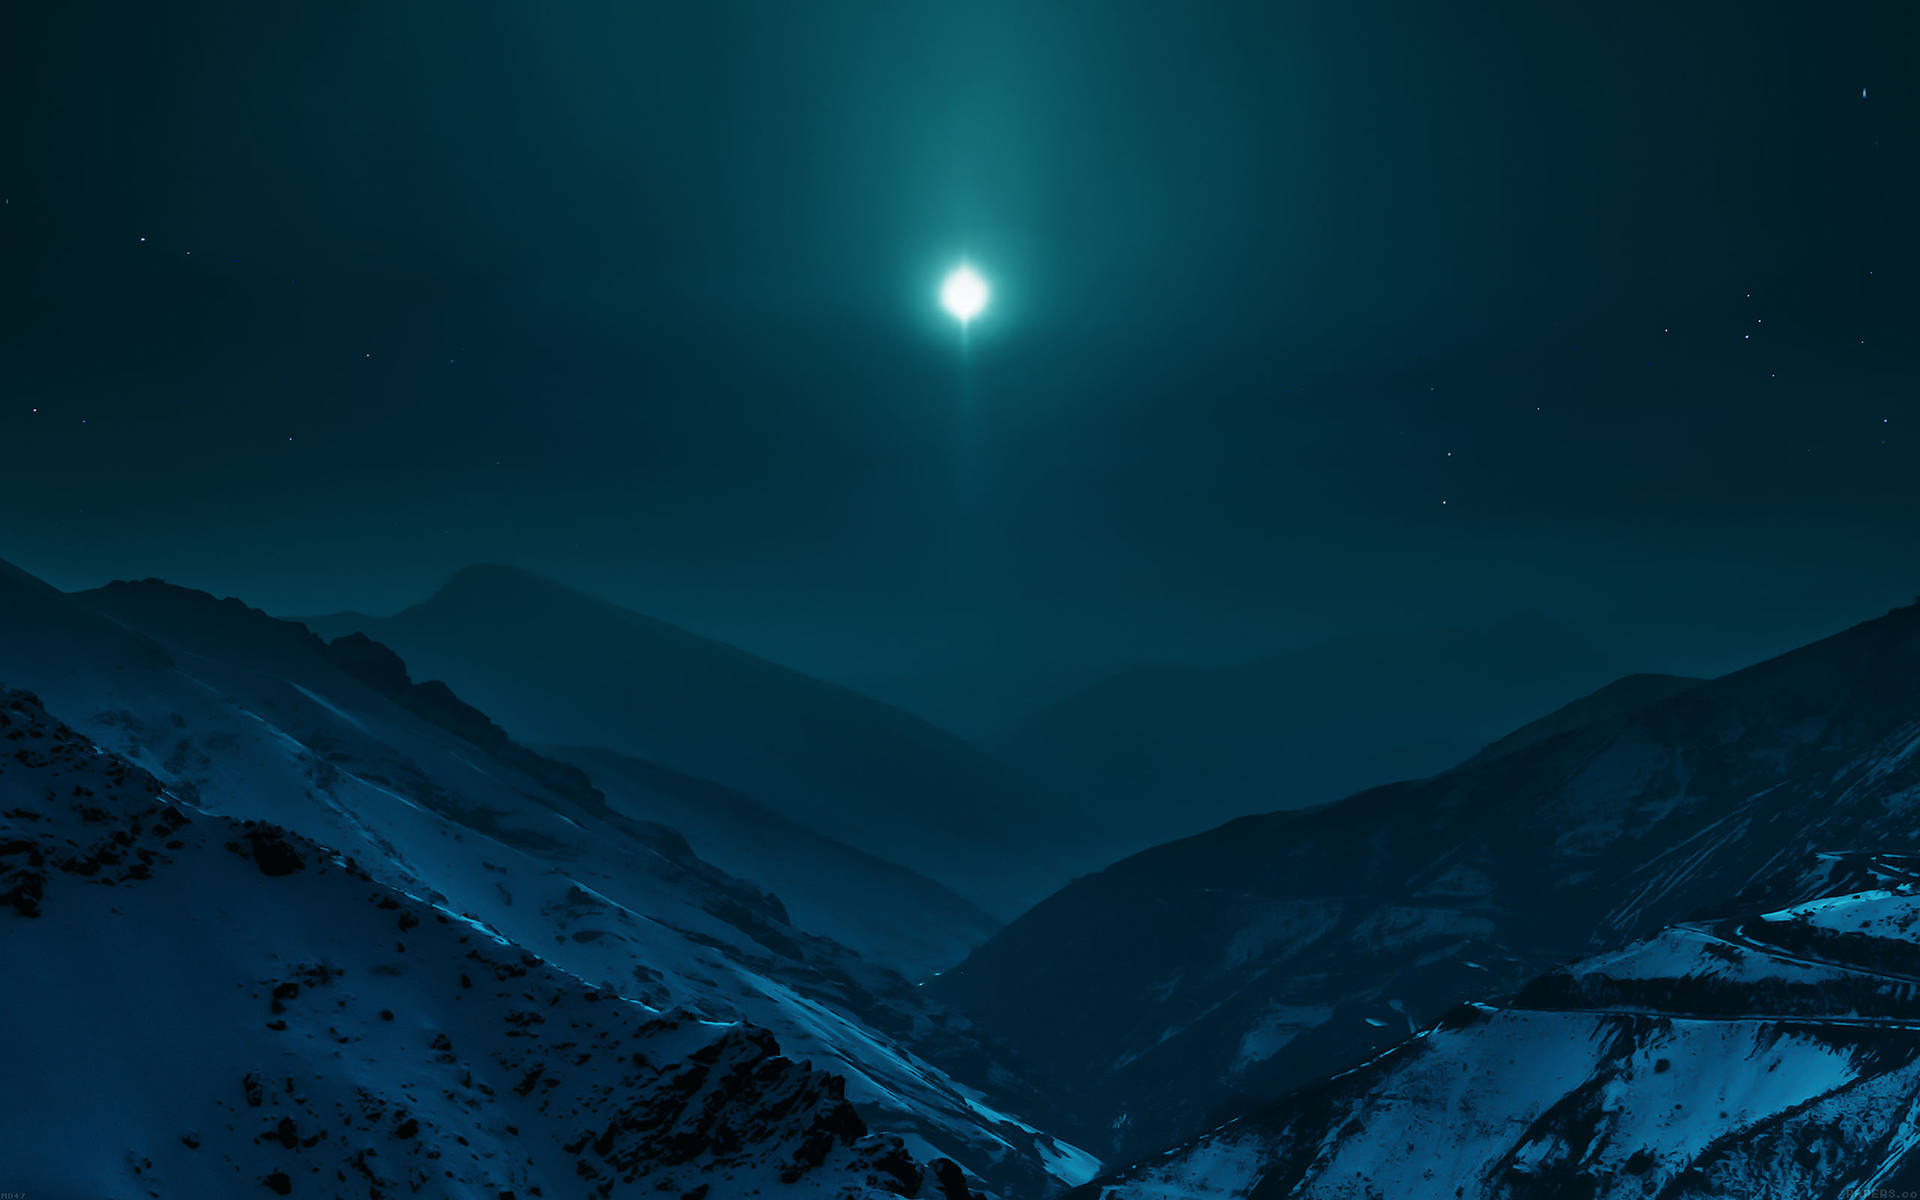 An evening view of the majestic Night Mountain Wallpaper